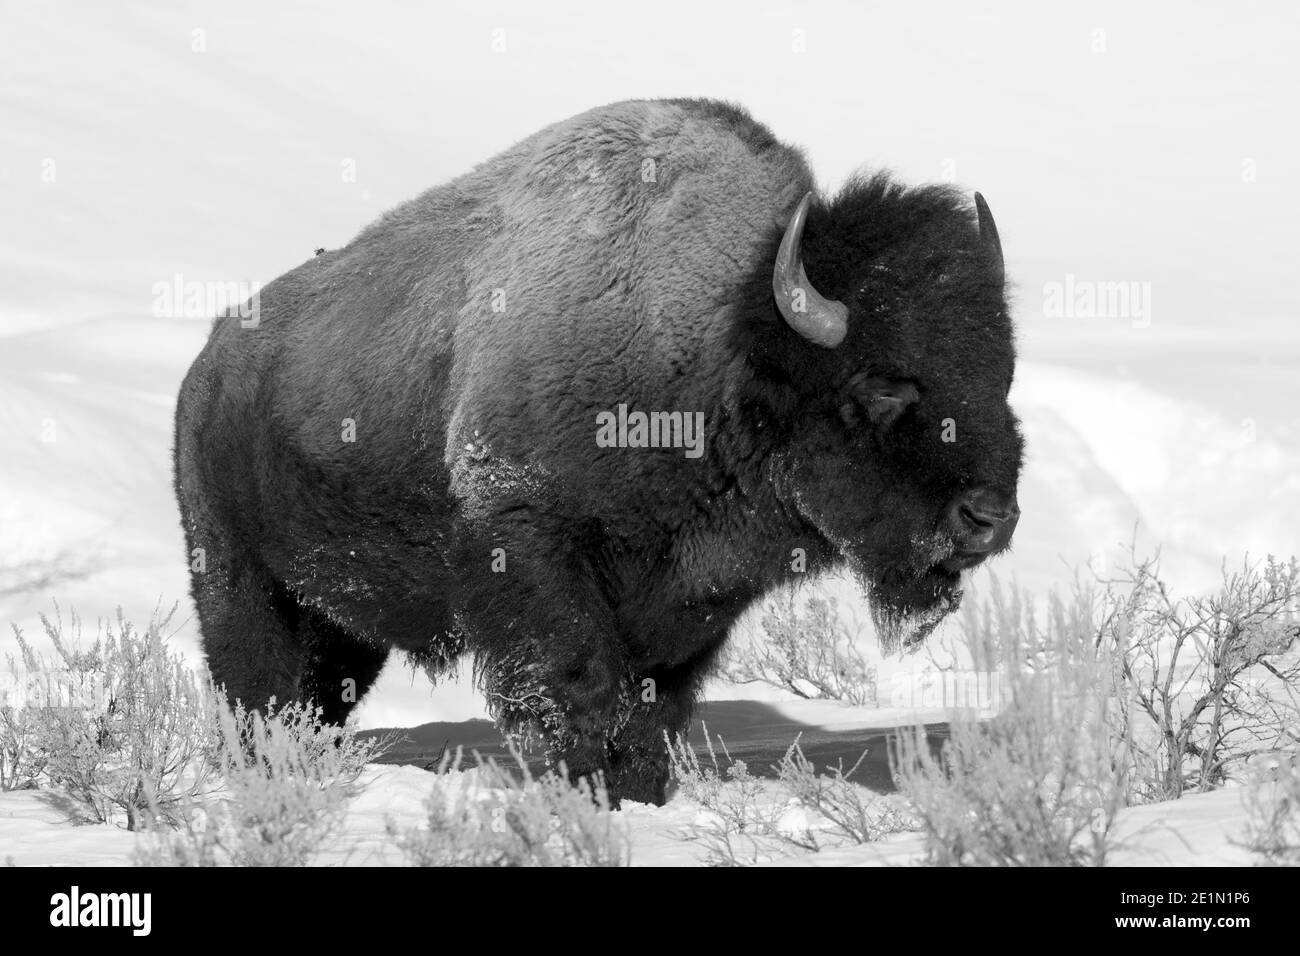 Winter picture of a bison (Bison bison) in the Lamar valley, Yellowstone National Park February 2017. Stock Photo